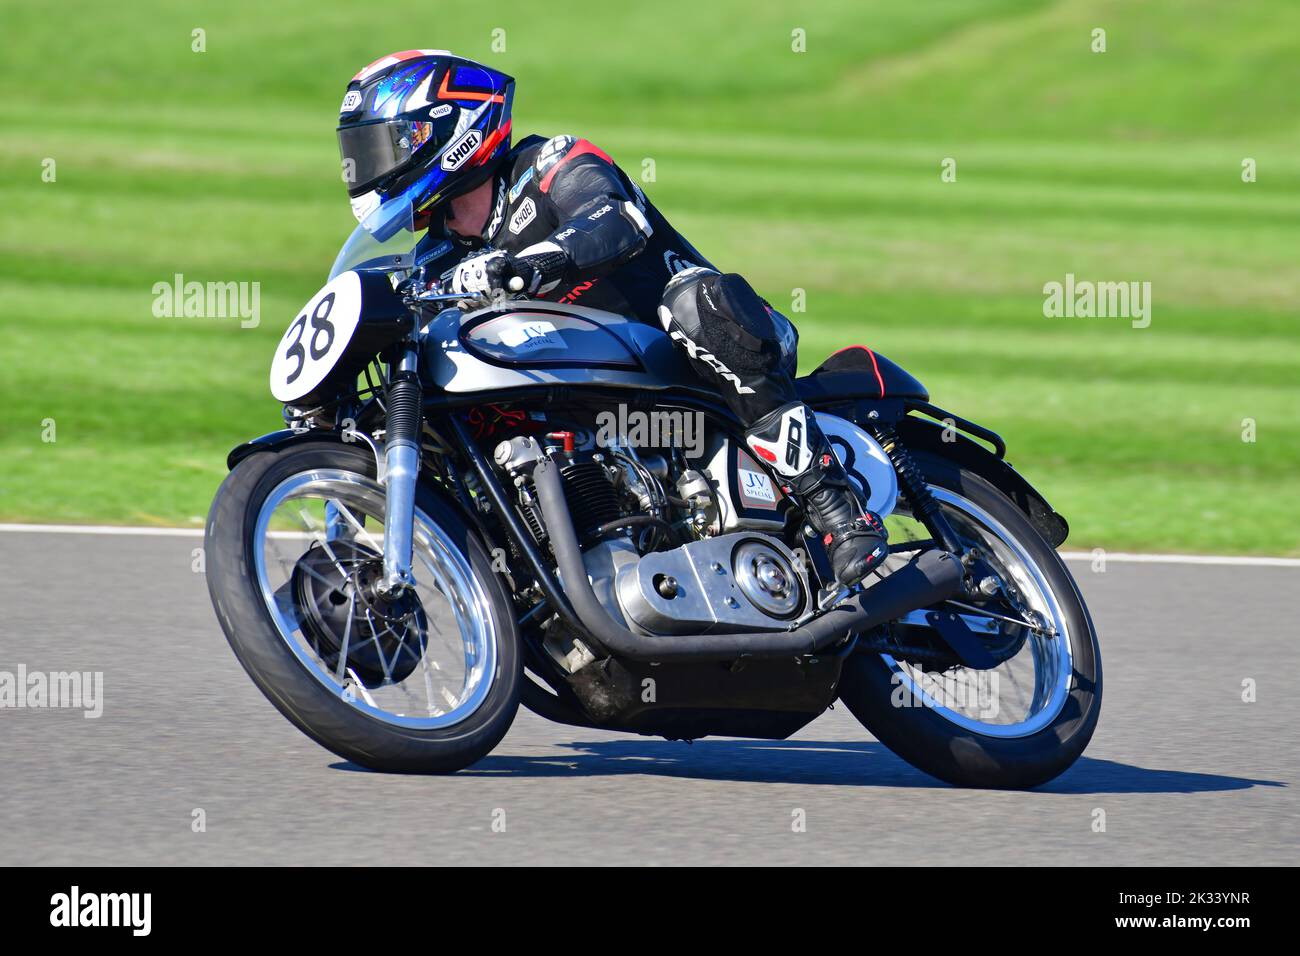 Max Hunt, Bradley Smith, Triton 650, Barry Sheene Memorial Trophy, two-riders per bike competing in each of the two 25 minute races across two days wi Stock Photo